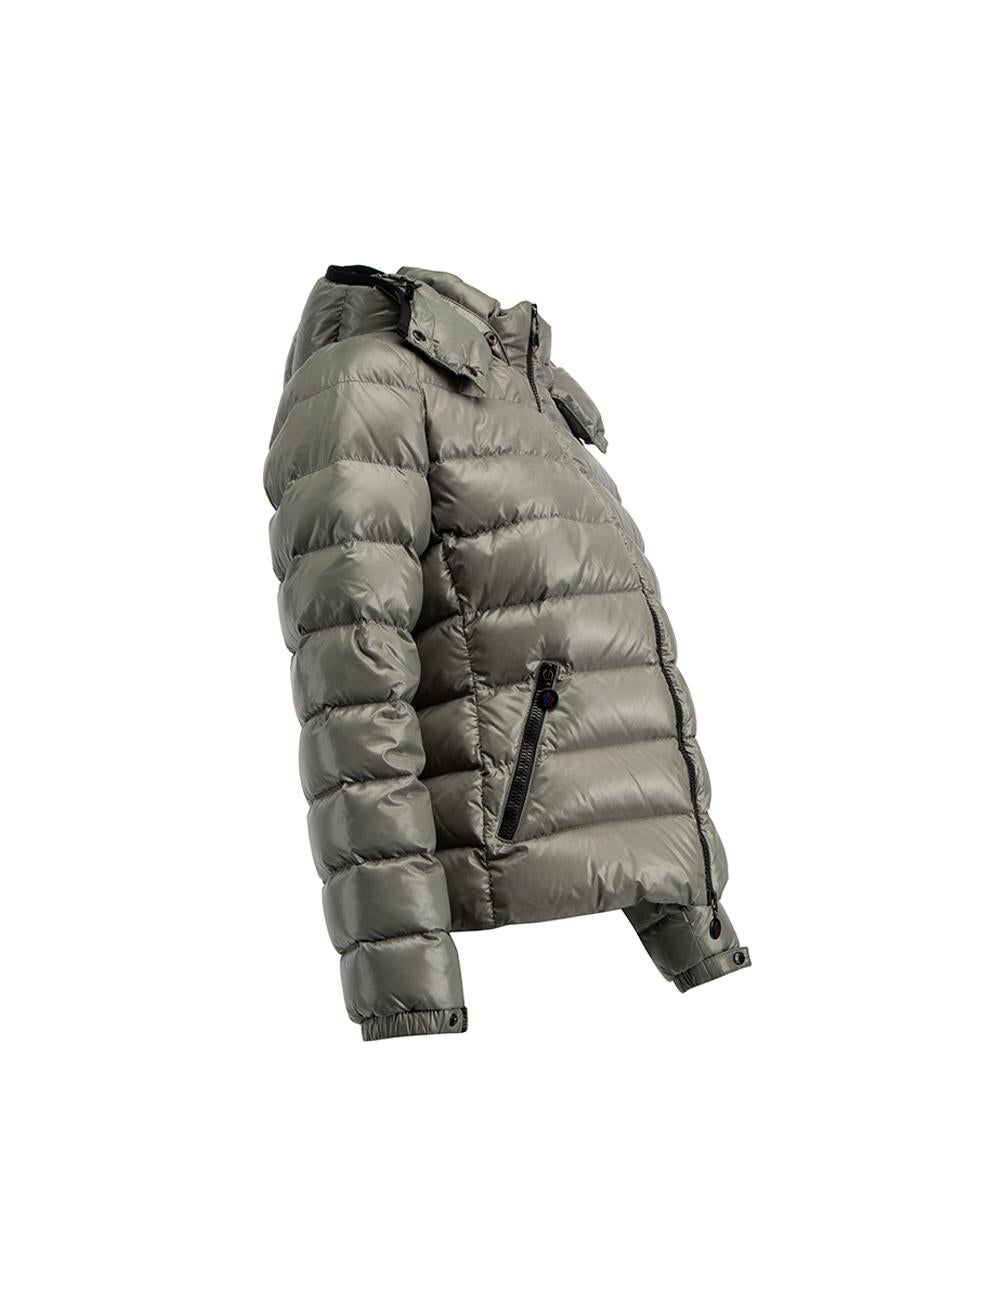 CONDITION is Very good. Hardly any wear to jacket is evident. Pulled thread and slight discolouring to the brand label on this used Moncler designer resale item. Details Grey Synthetic Down puffer jacket Buttoned cuffs Snap button detachable hood